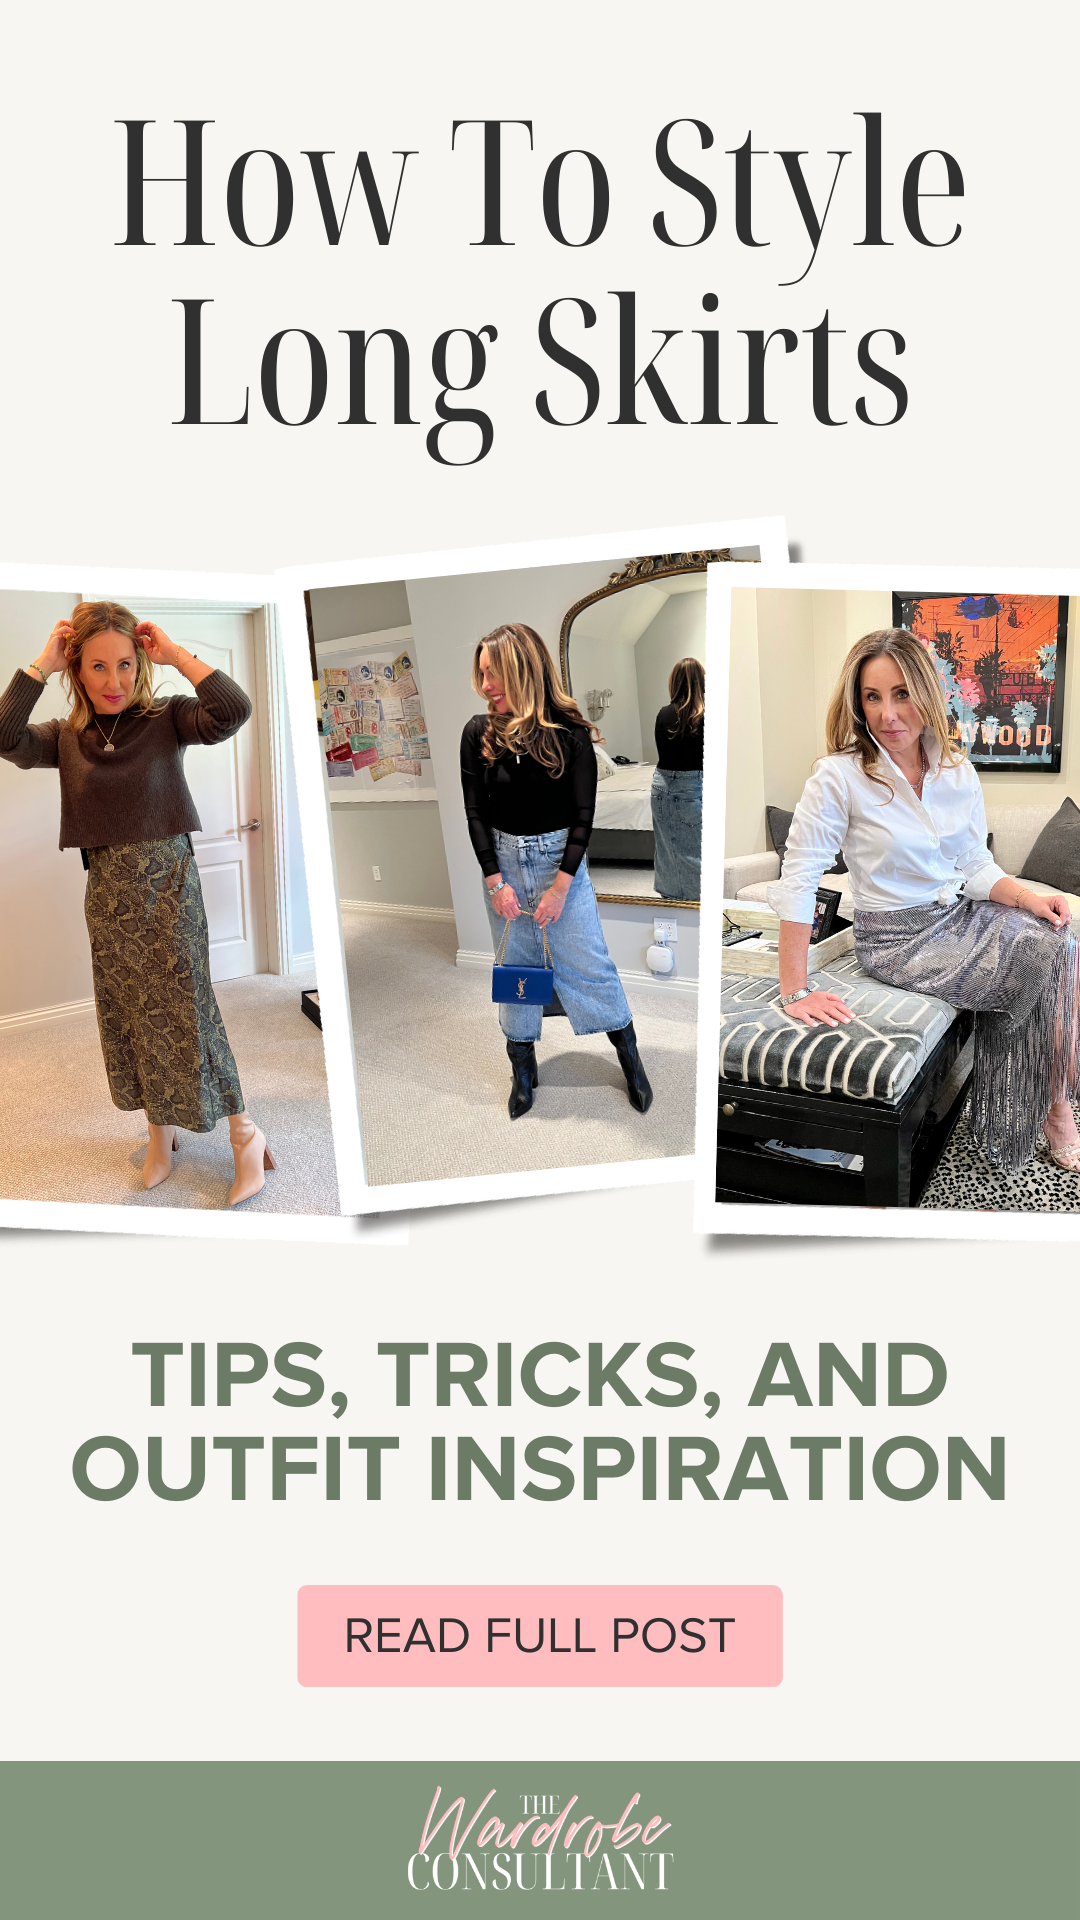 How To Style Long Skirts: Stylist Tips, Simple Tricks, and Outfit ...